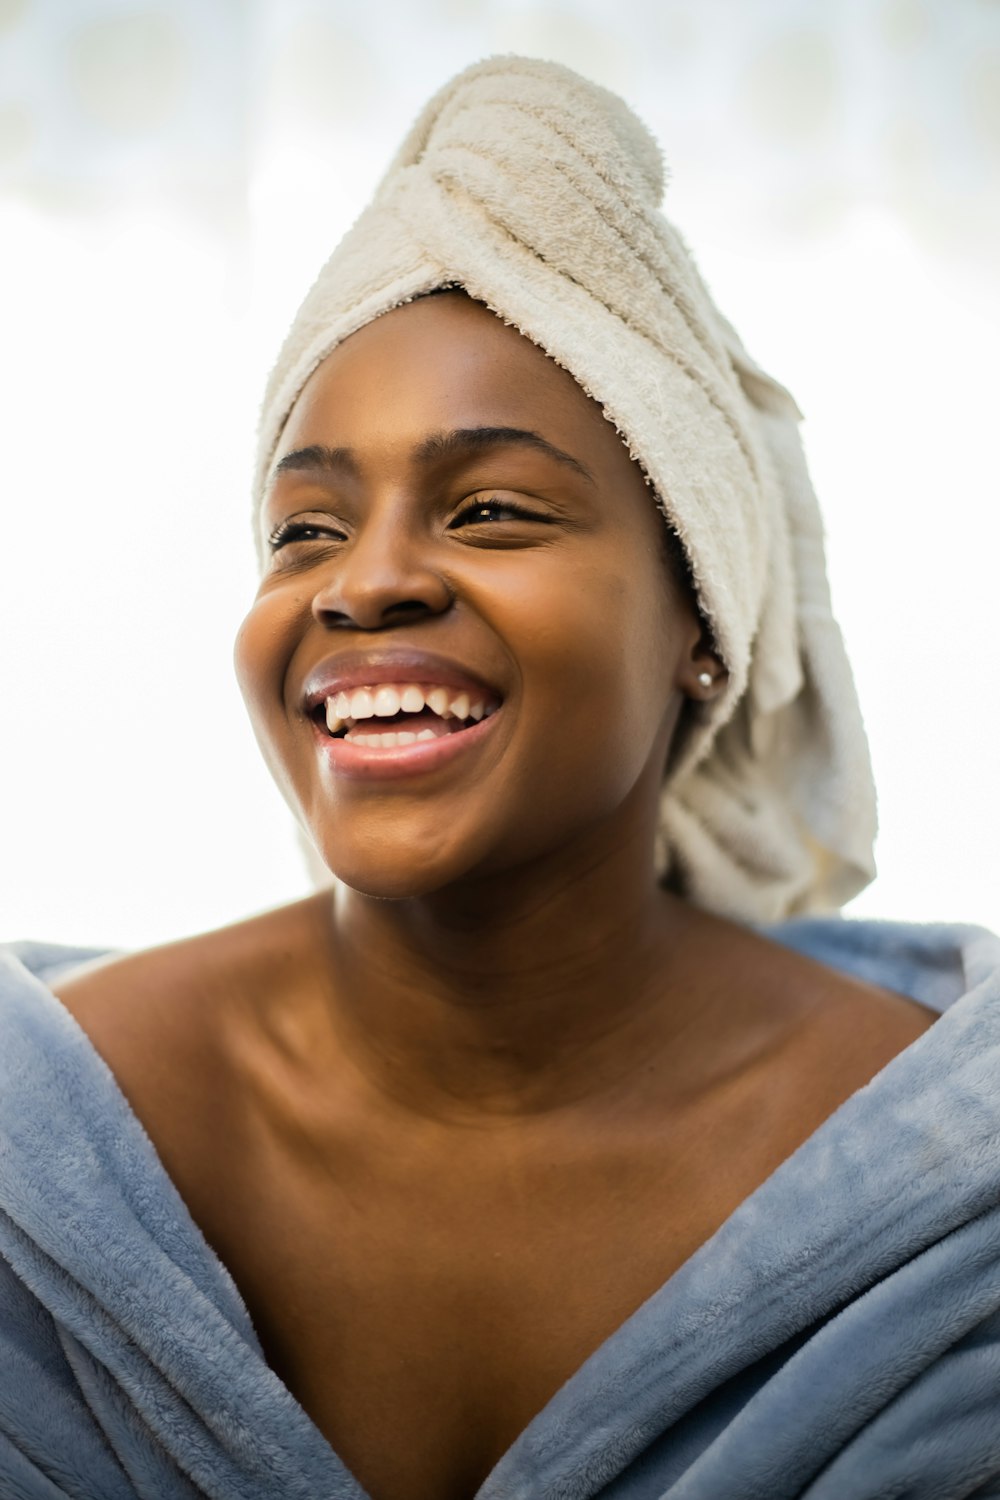 a person wearing a white head scarf